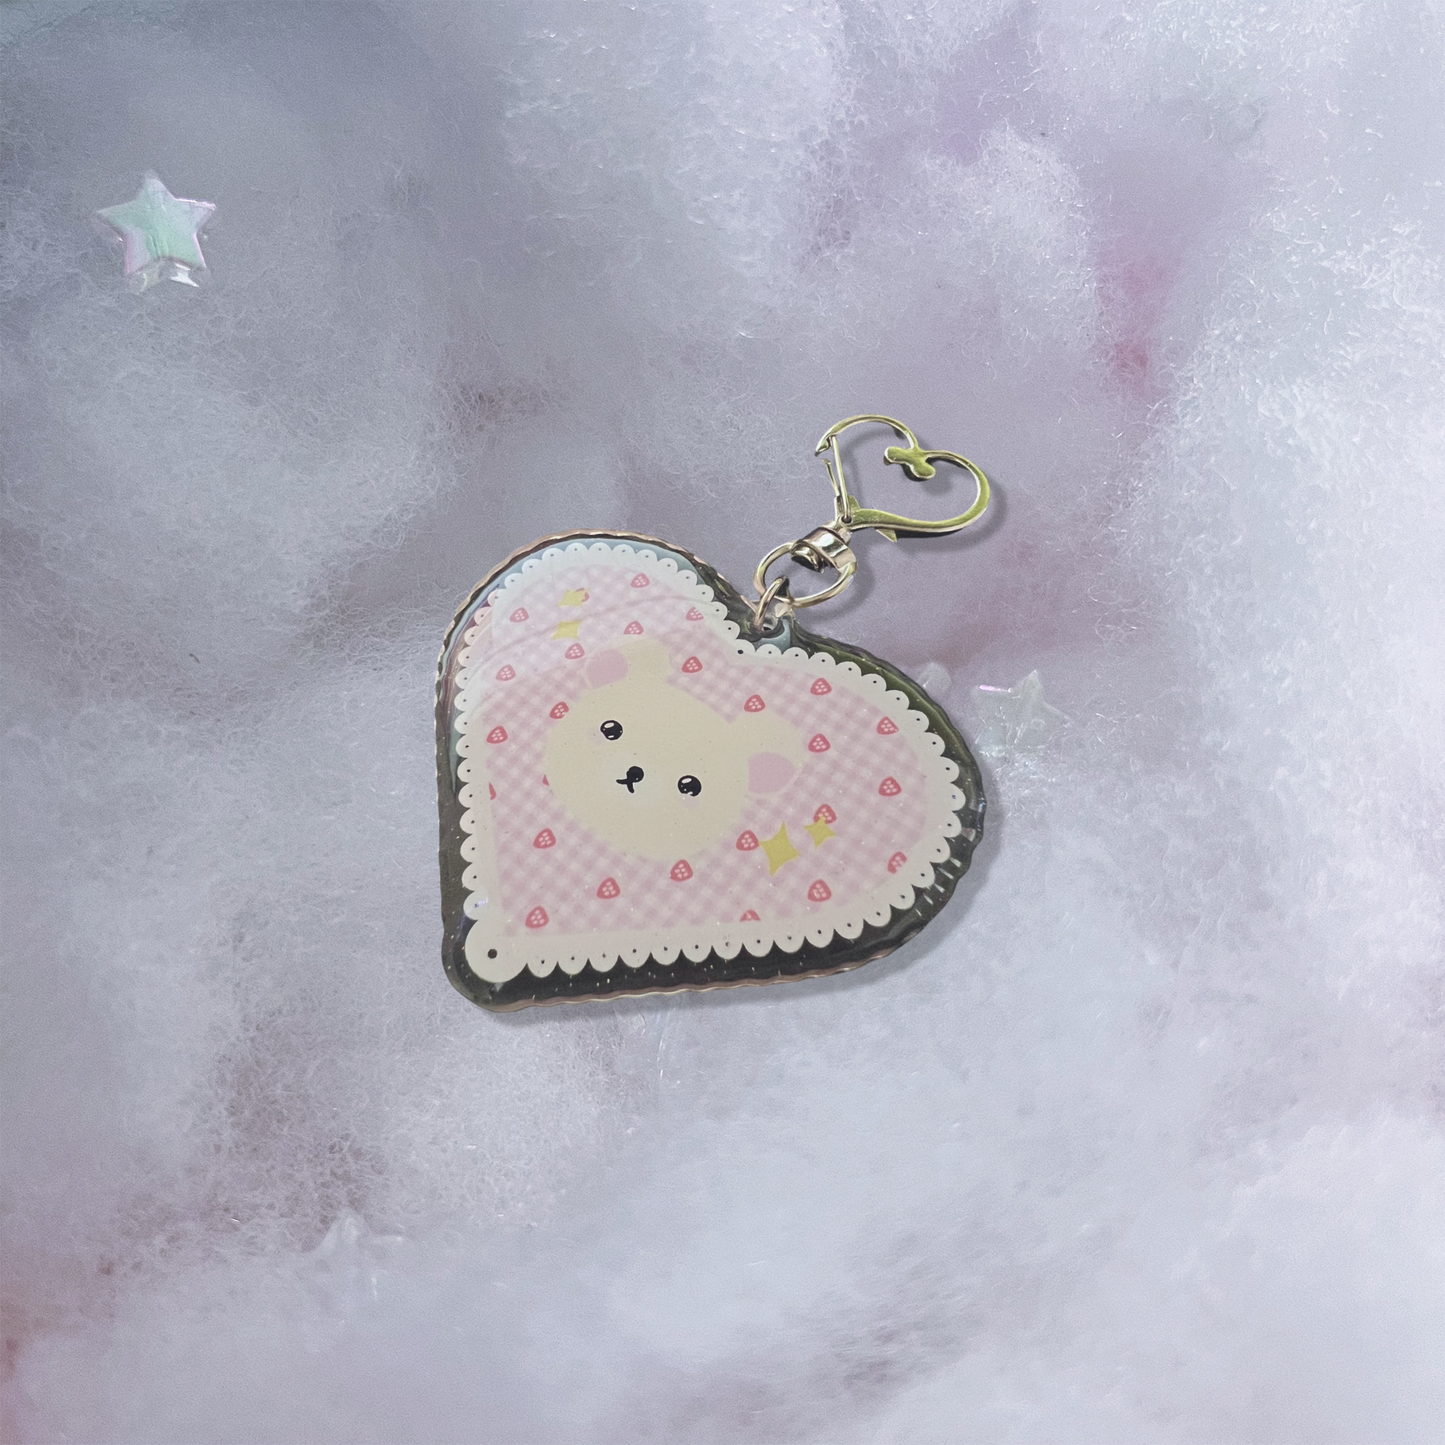 White bear acrylic keychain with micro-glitter finish and silver heart hook.